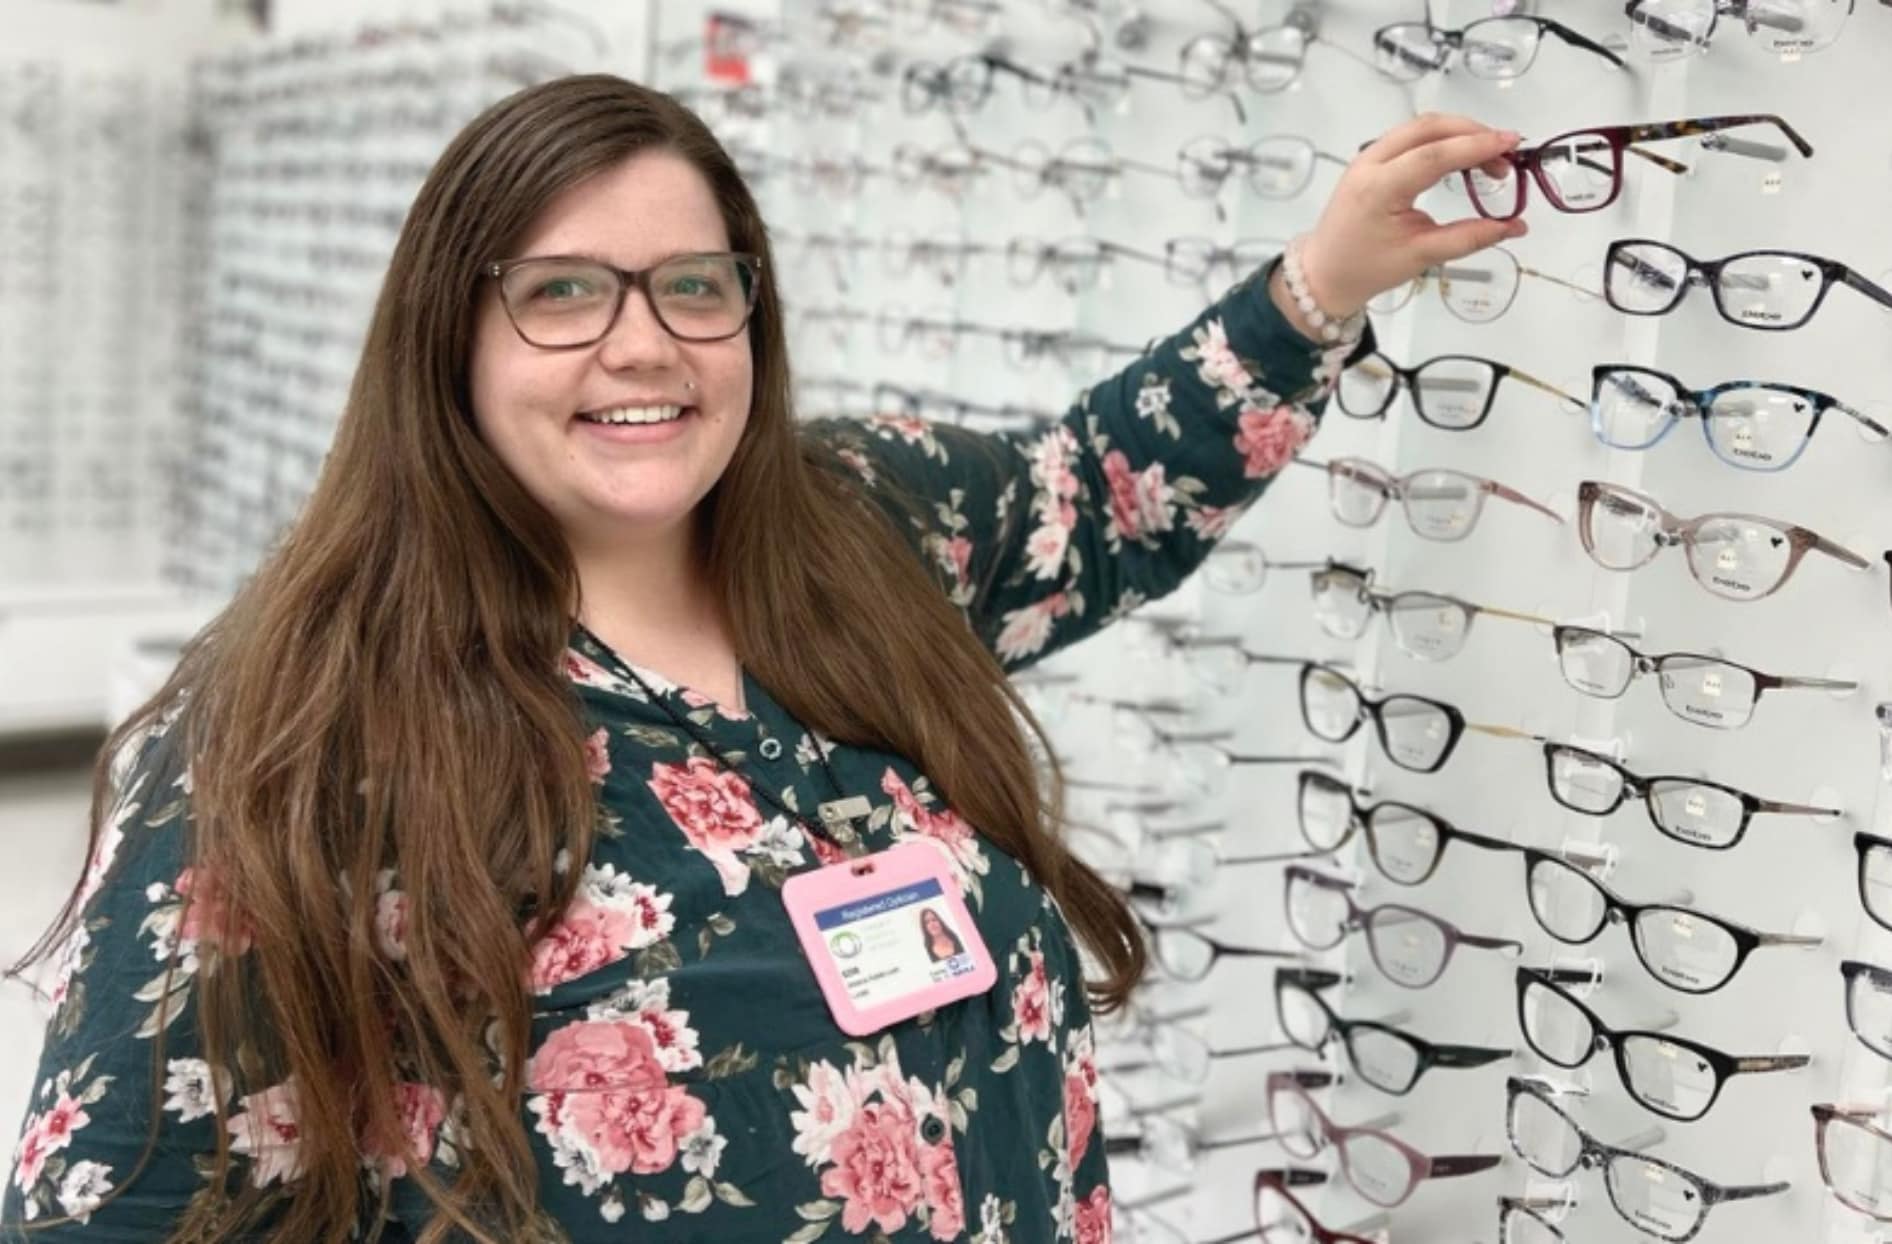 Jessica standing next to a display of eyeglasses, picking up a pair.